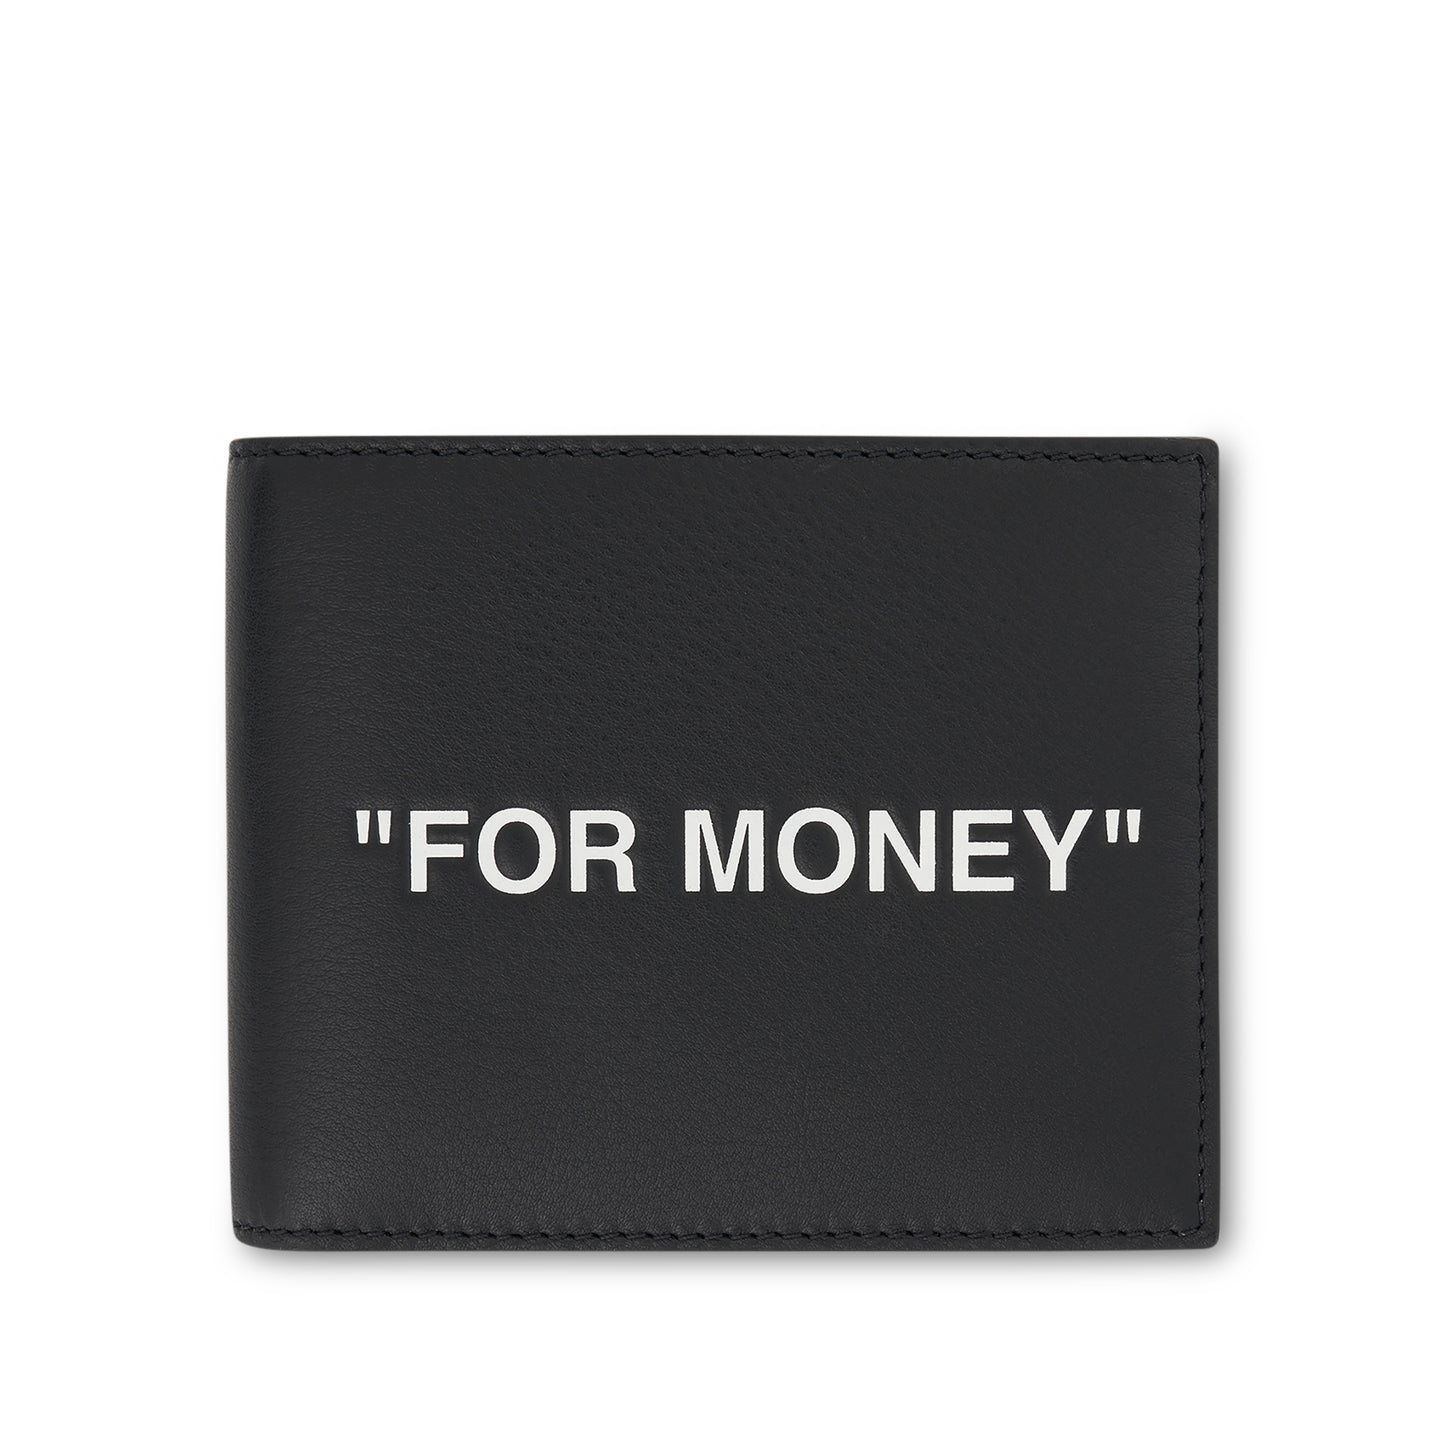 Quote Bifold Wallet in Black/White